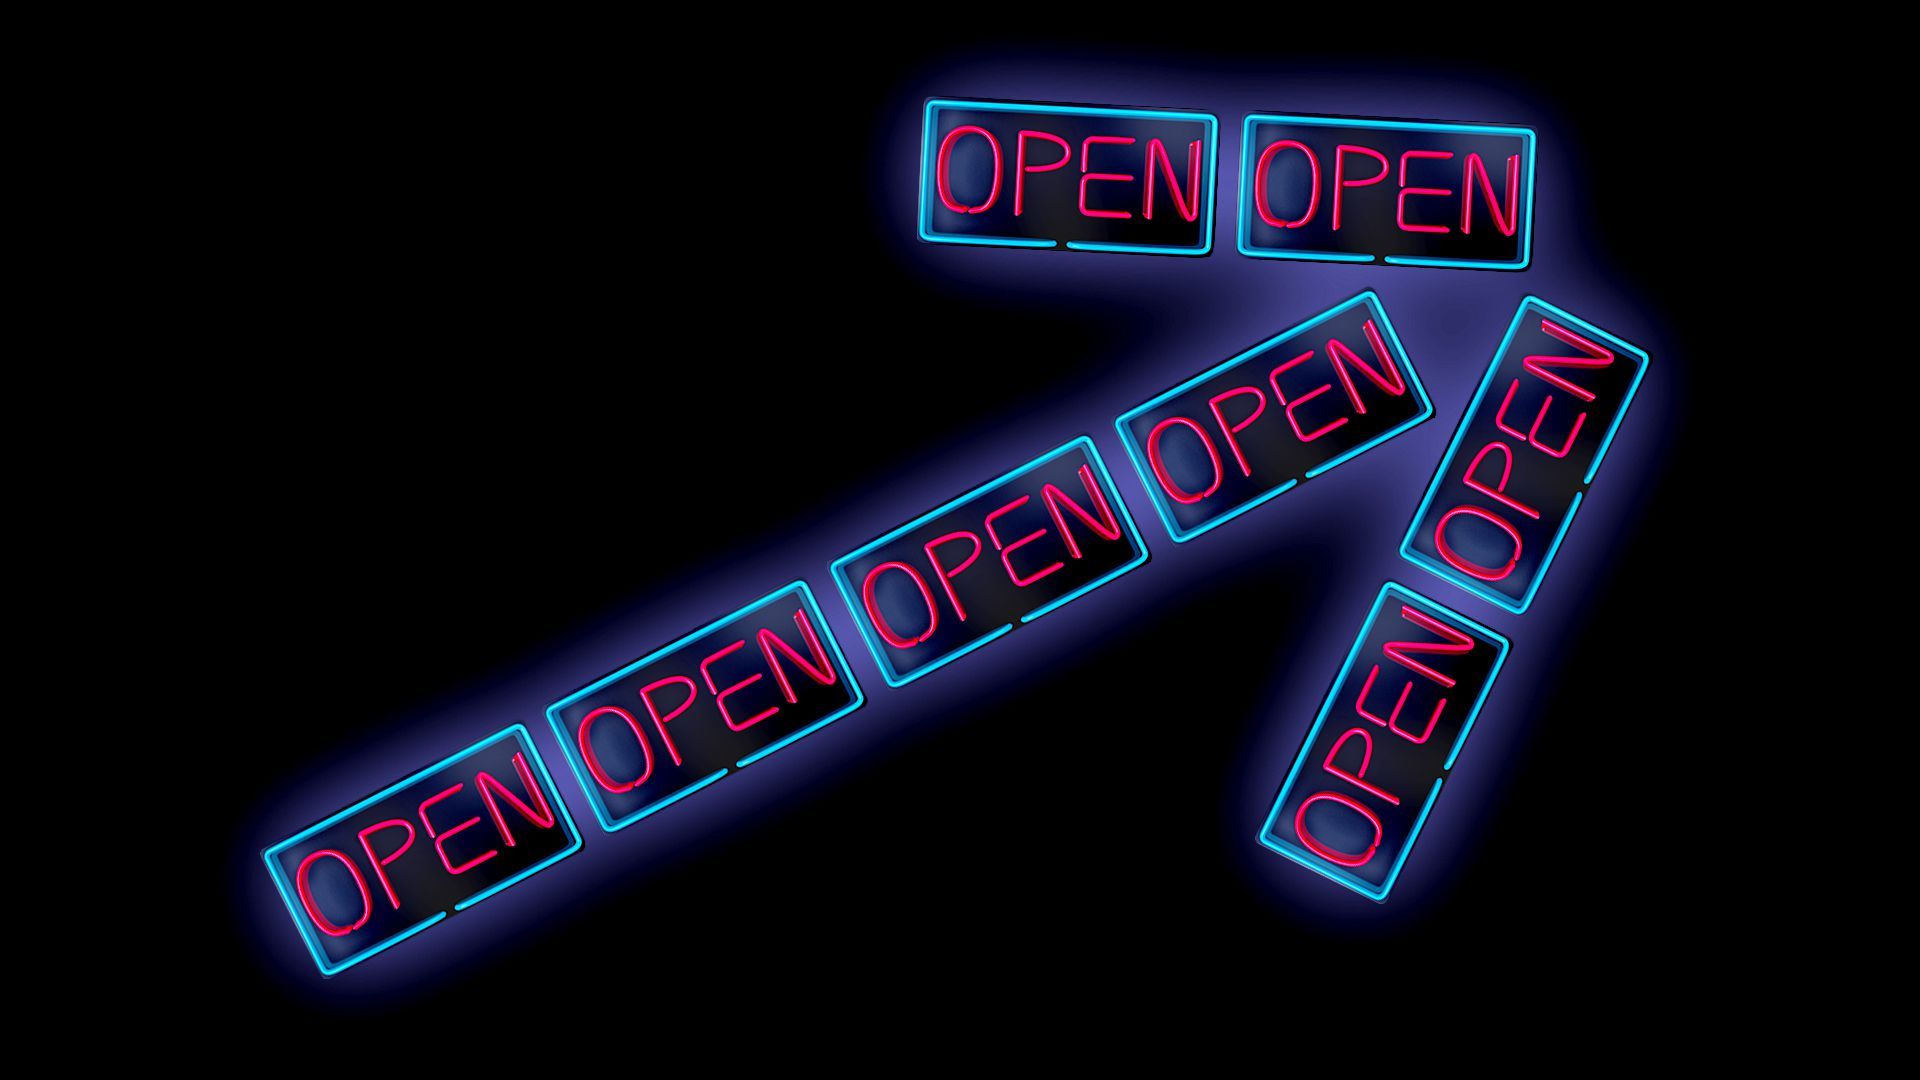 Illustration of an upward pointing arrow made from LED open signs